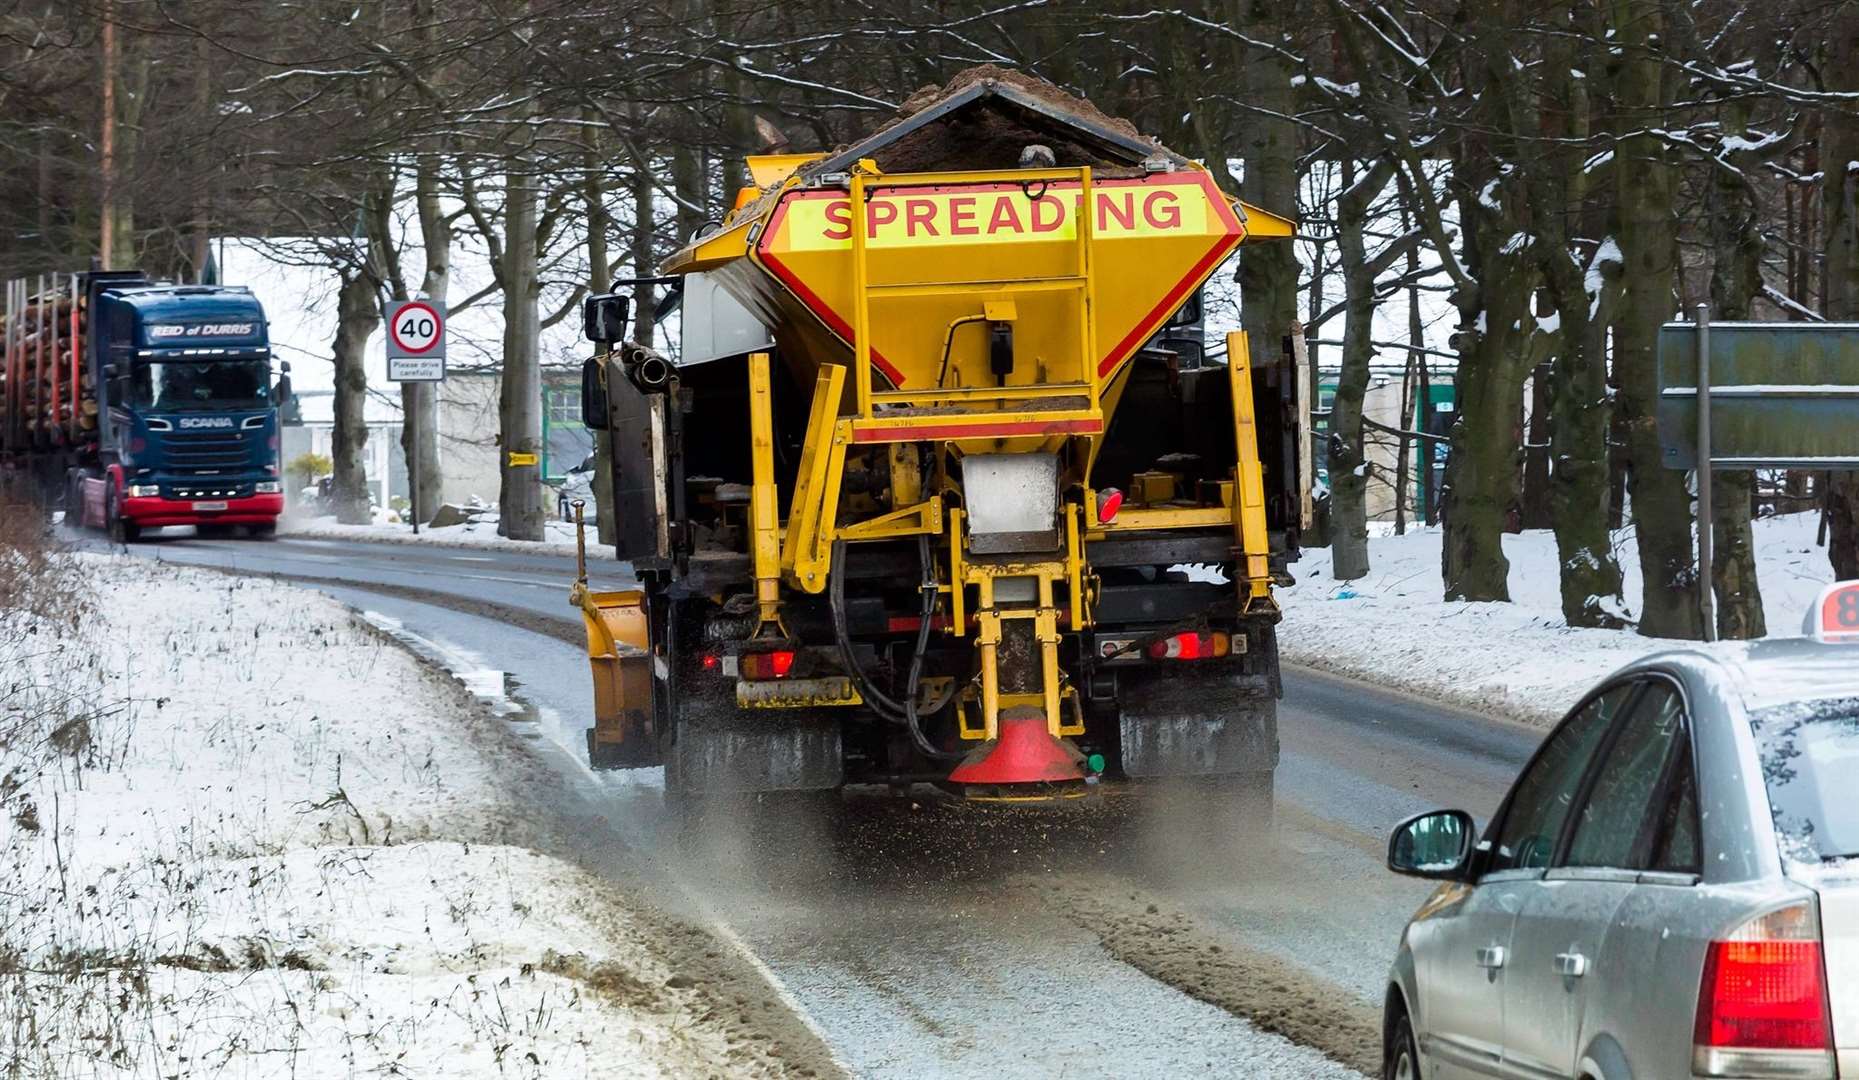 Gritter costs are putting pressure on council budgets.